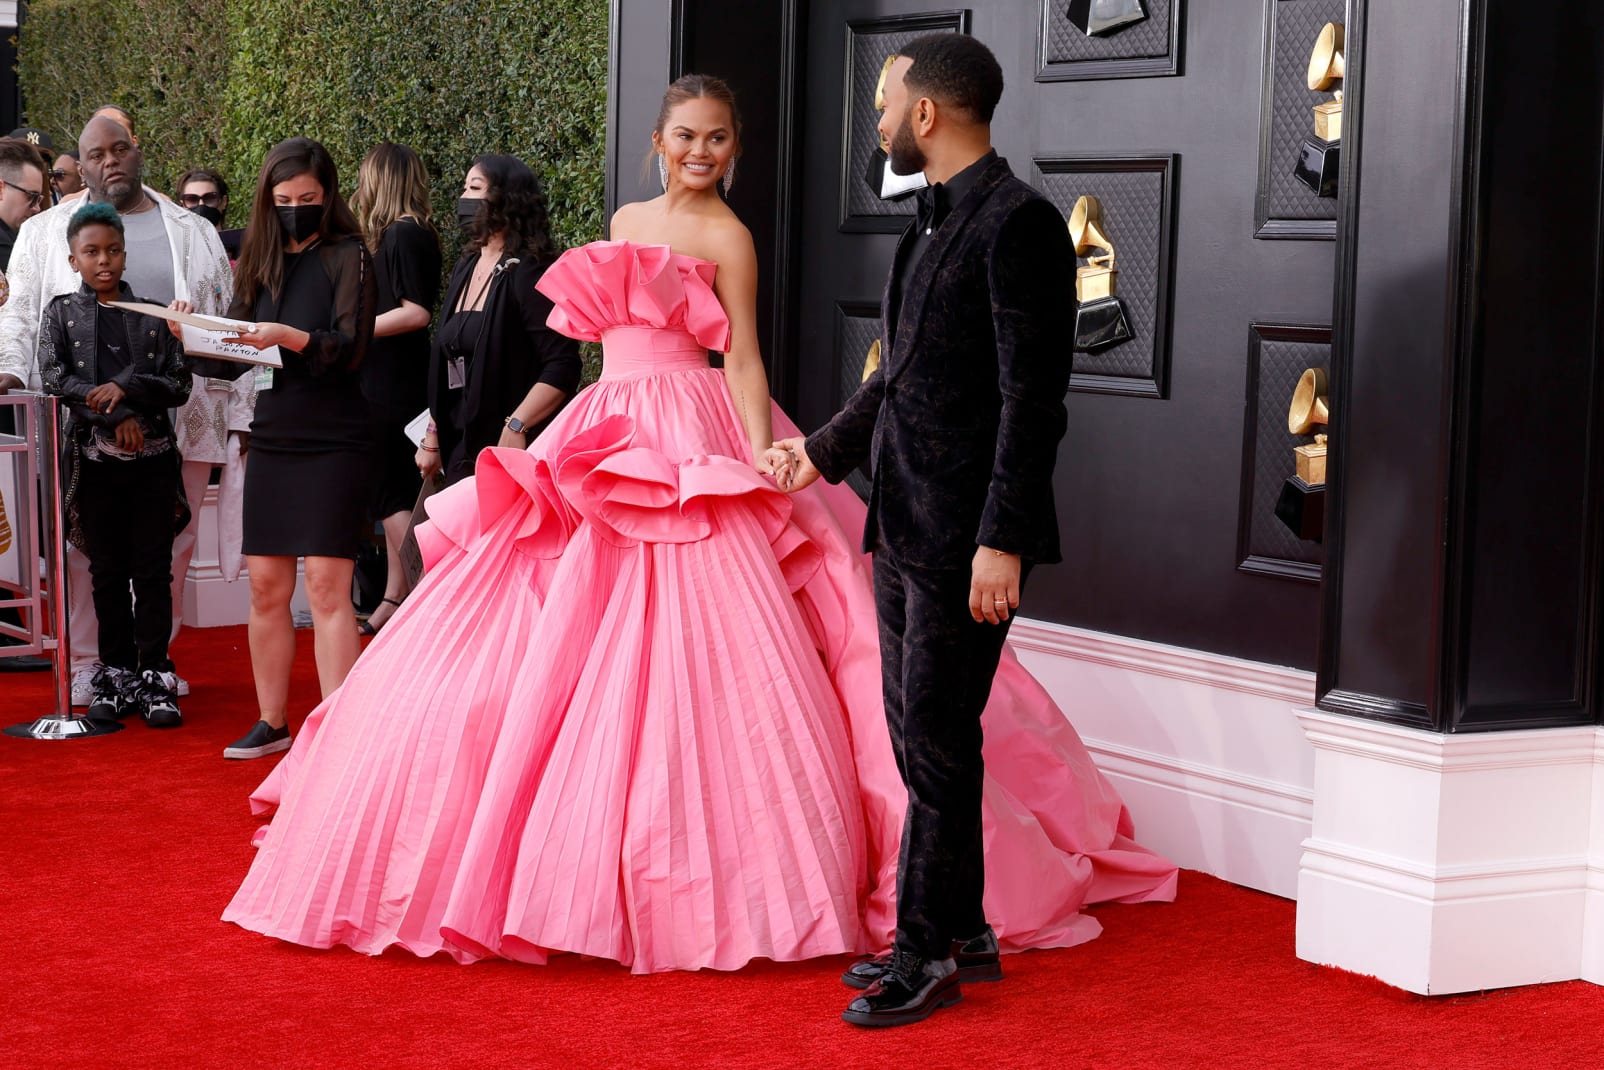 Chrissy Teigen was one of many pink looks of the night in her voluminous fan dress, while John Legend wore a velvet black suit by Zegna. 